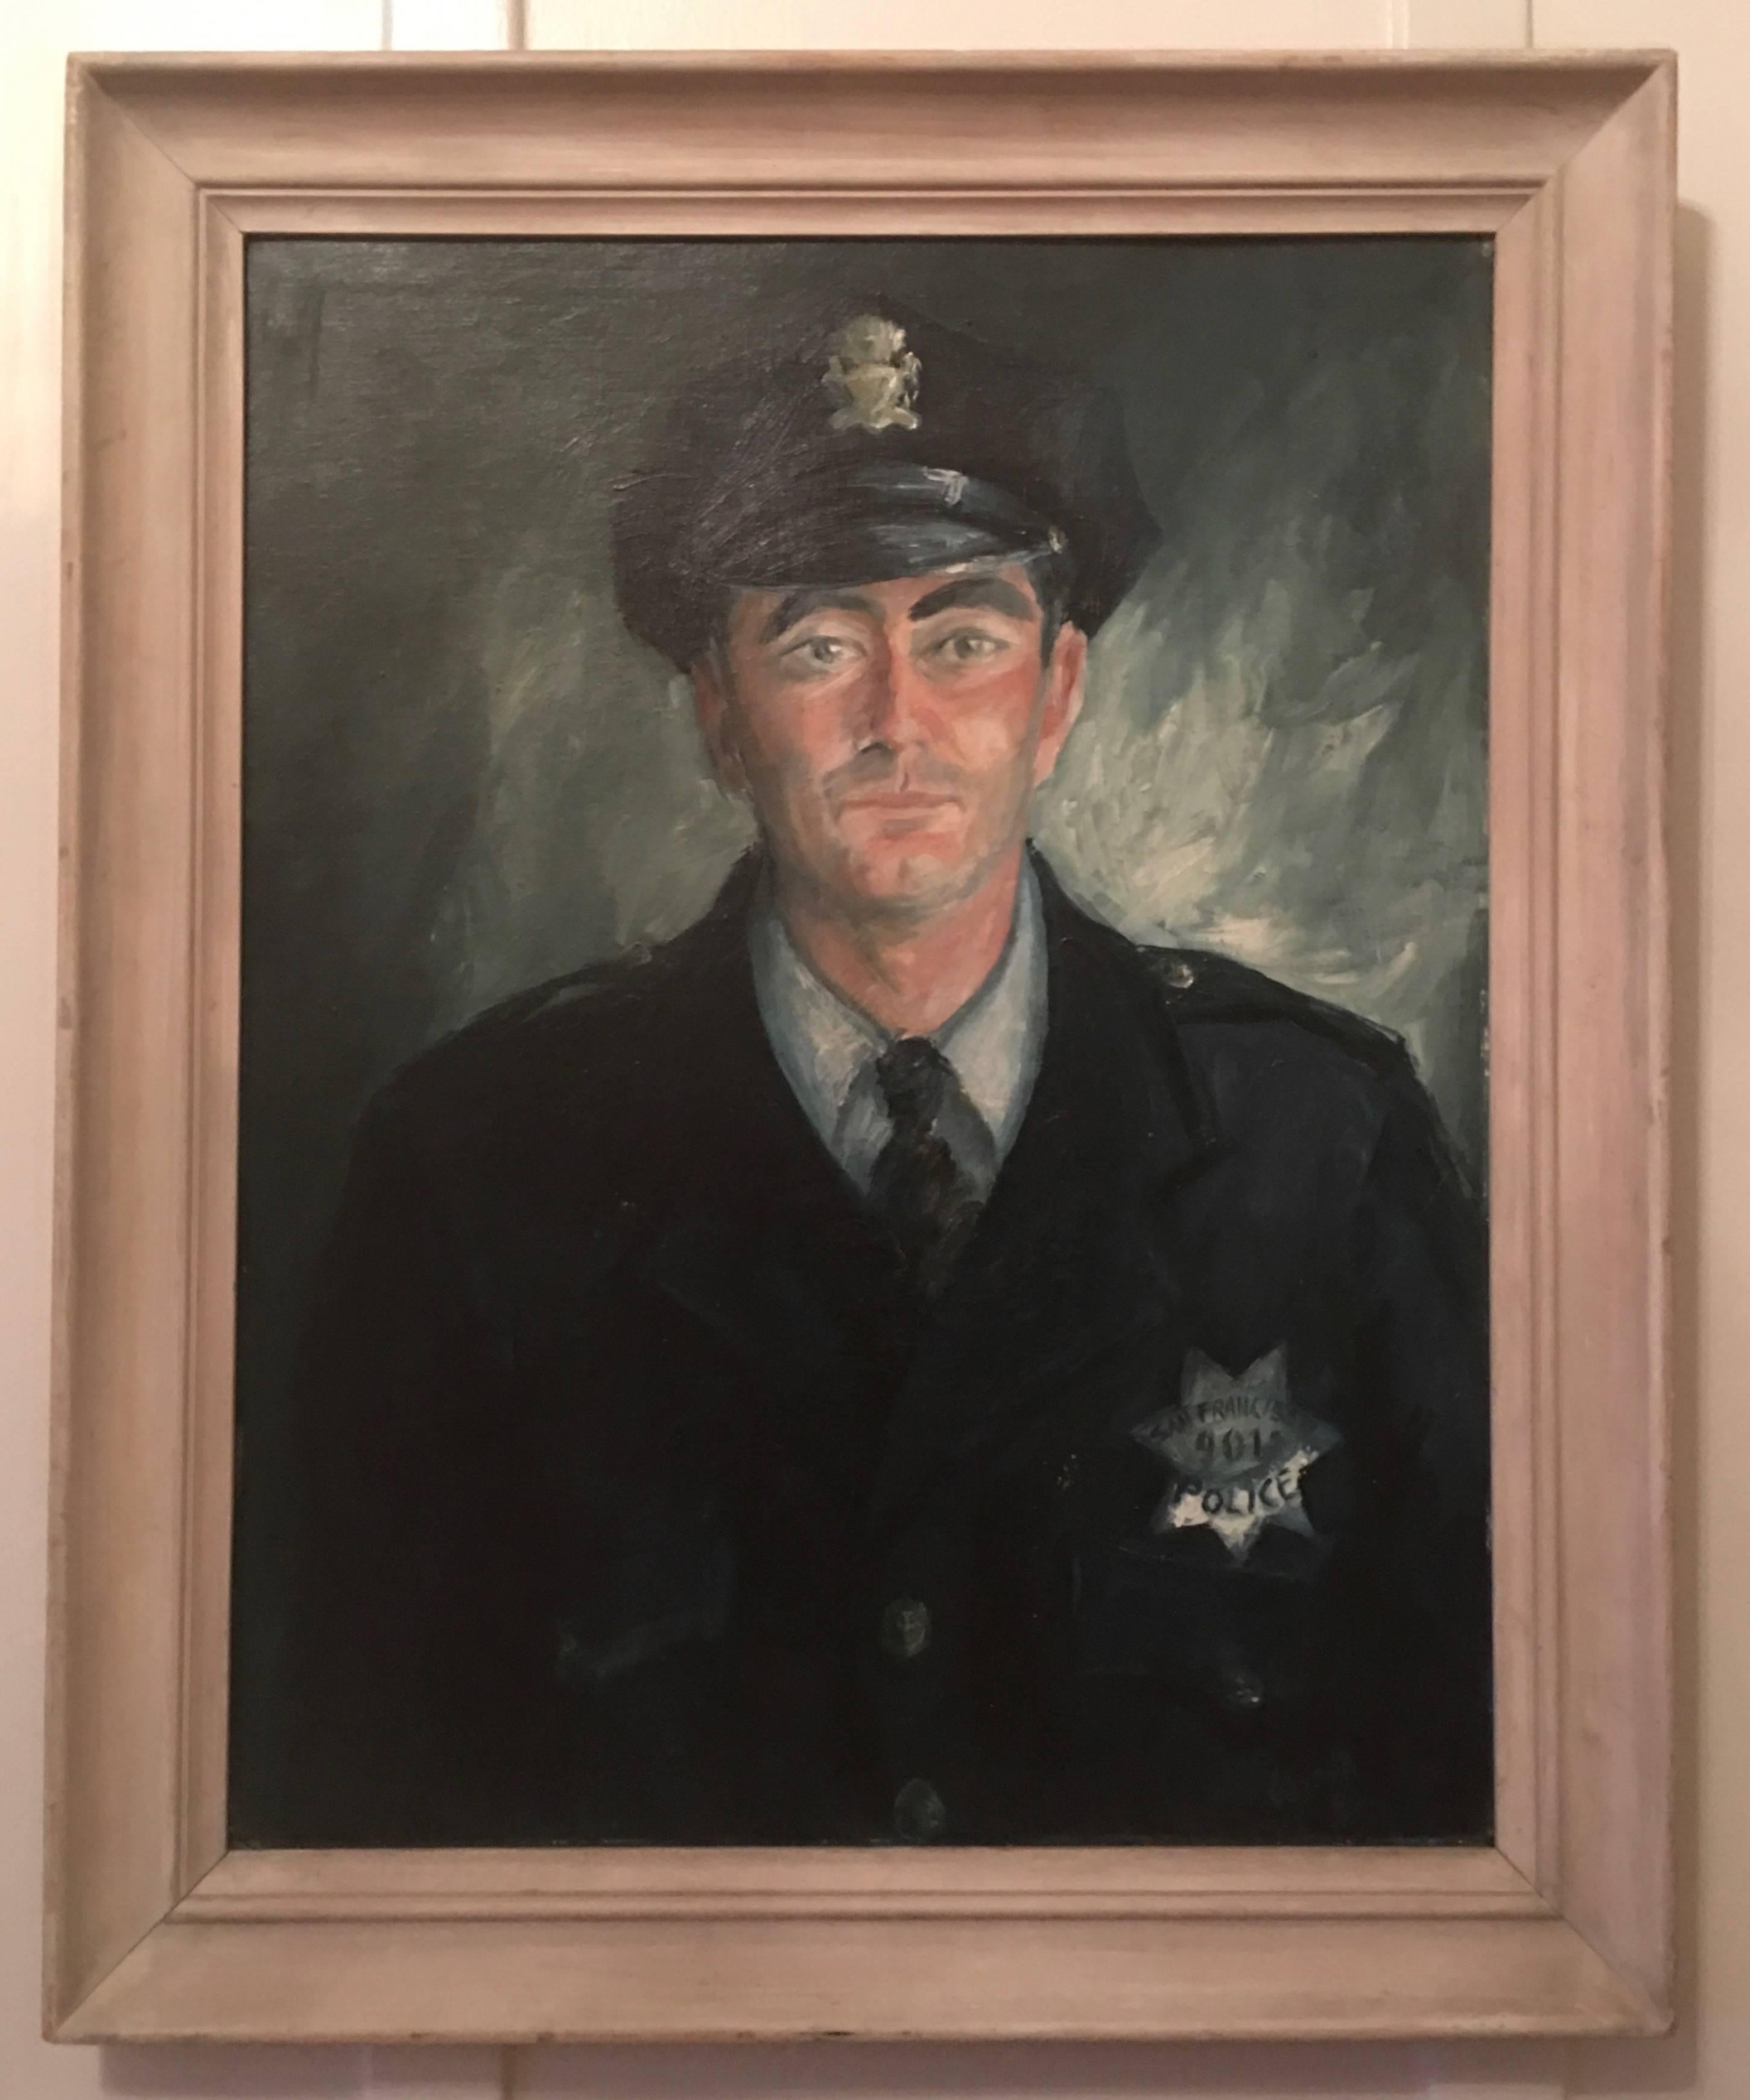 Al Smith
Portrait of a Cop
1953
oil on canvas board
28 x 22 inches
Signed and dated lower right
Excellent condition
Original frame
